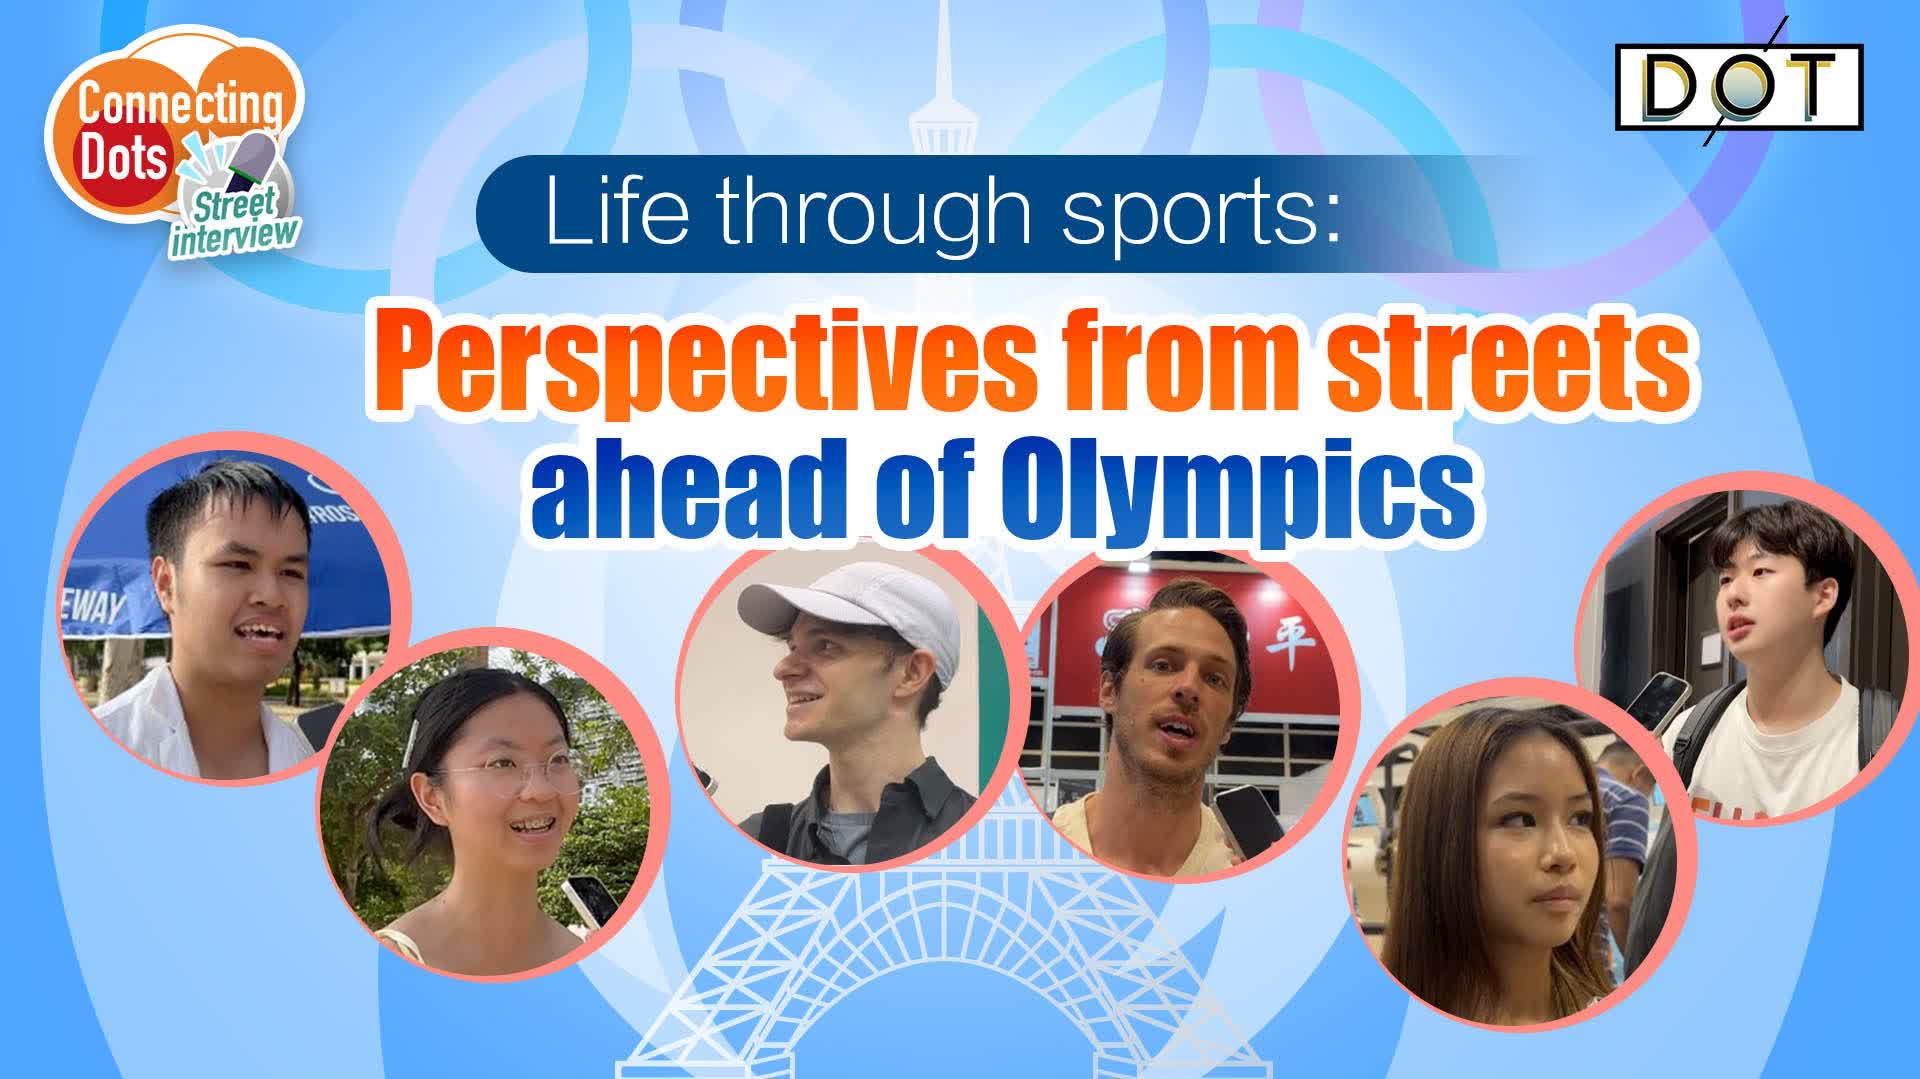 Connecting Dots | Life through sports: Perspectives from streets ahead of Olympics